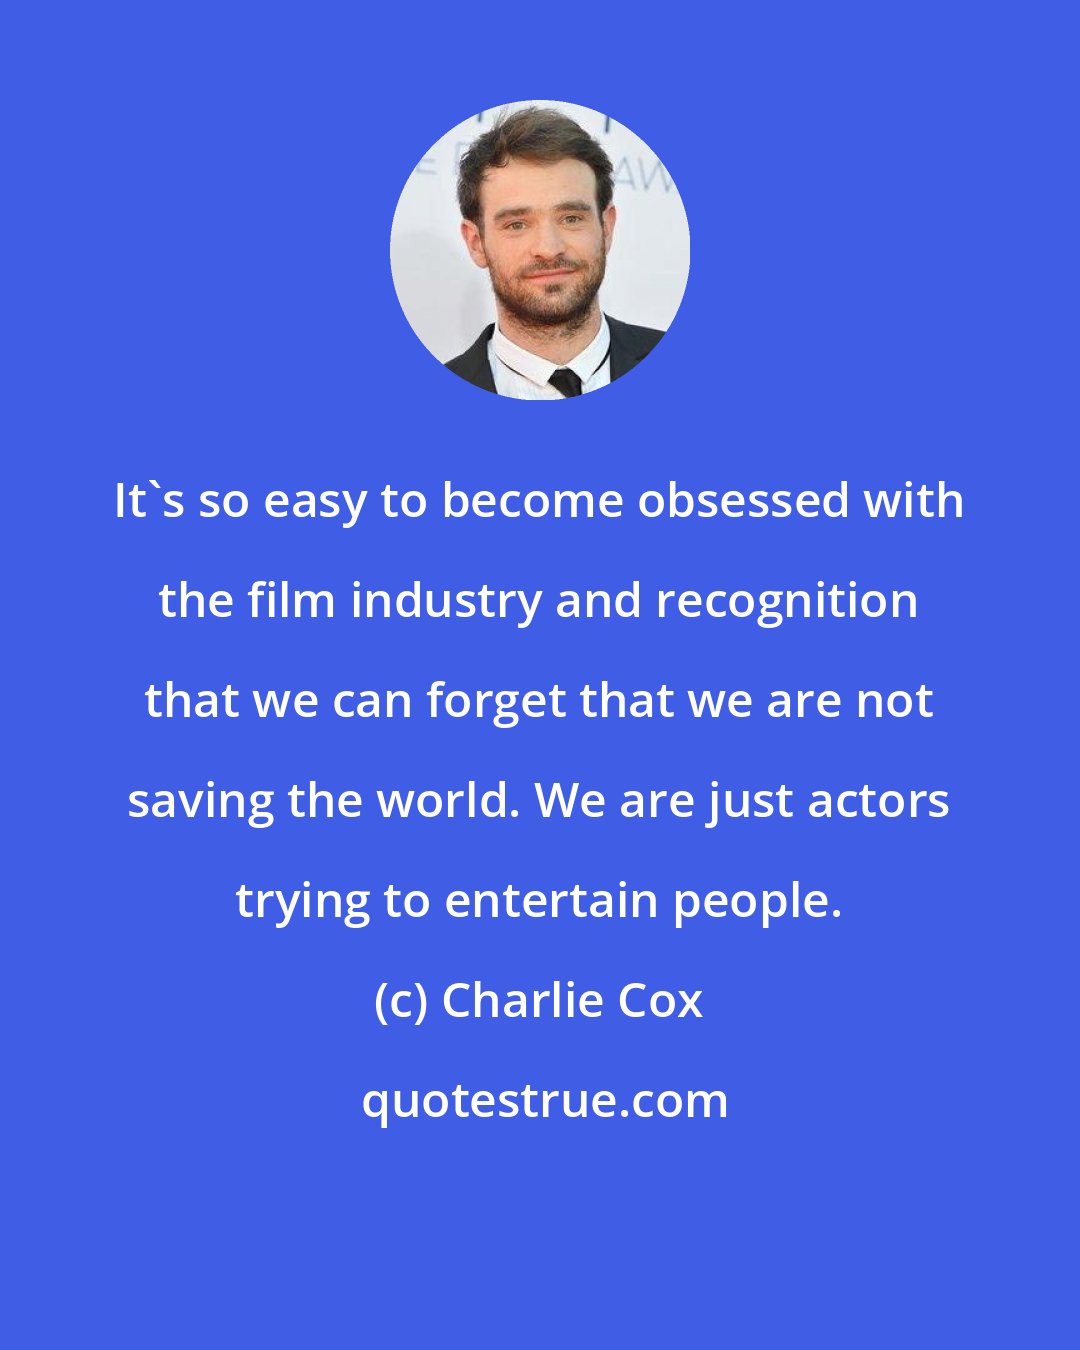 Charlie Cox: It's so easy to become obsessed with the film industry and recognition that we can forget that we are not saving the world. We are just actors trying to entertain people.